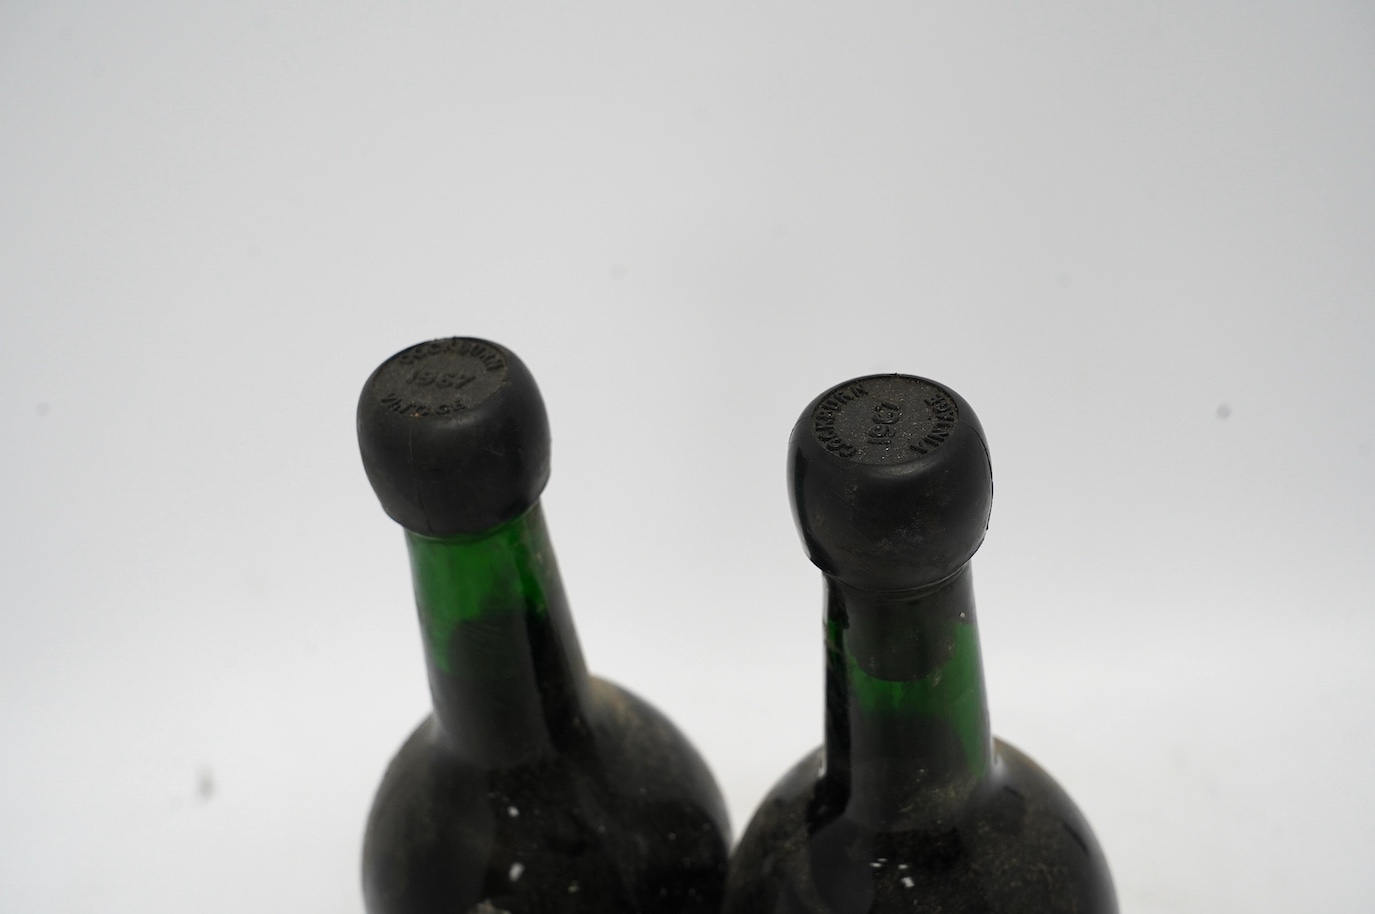 Two bottles of Cockburn's 1967 vintage port. Condition - levels good, capsules sound and labels worn.